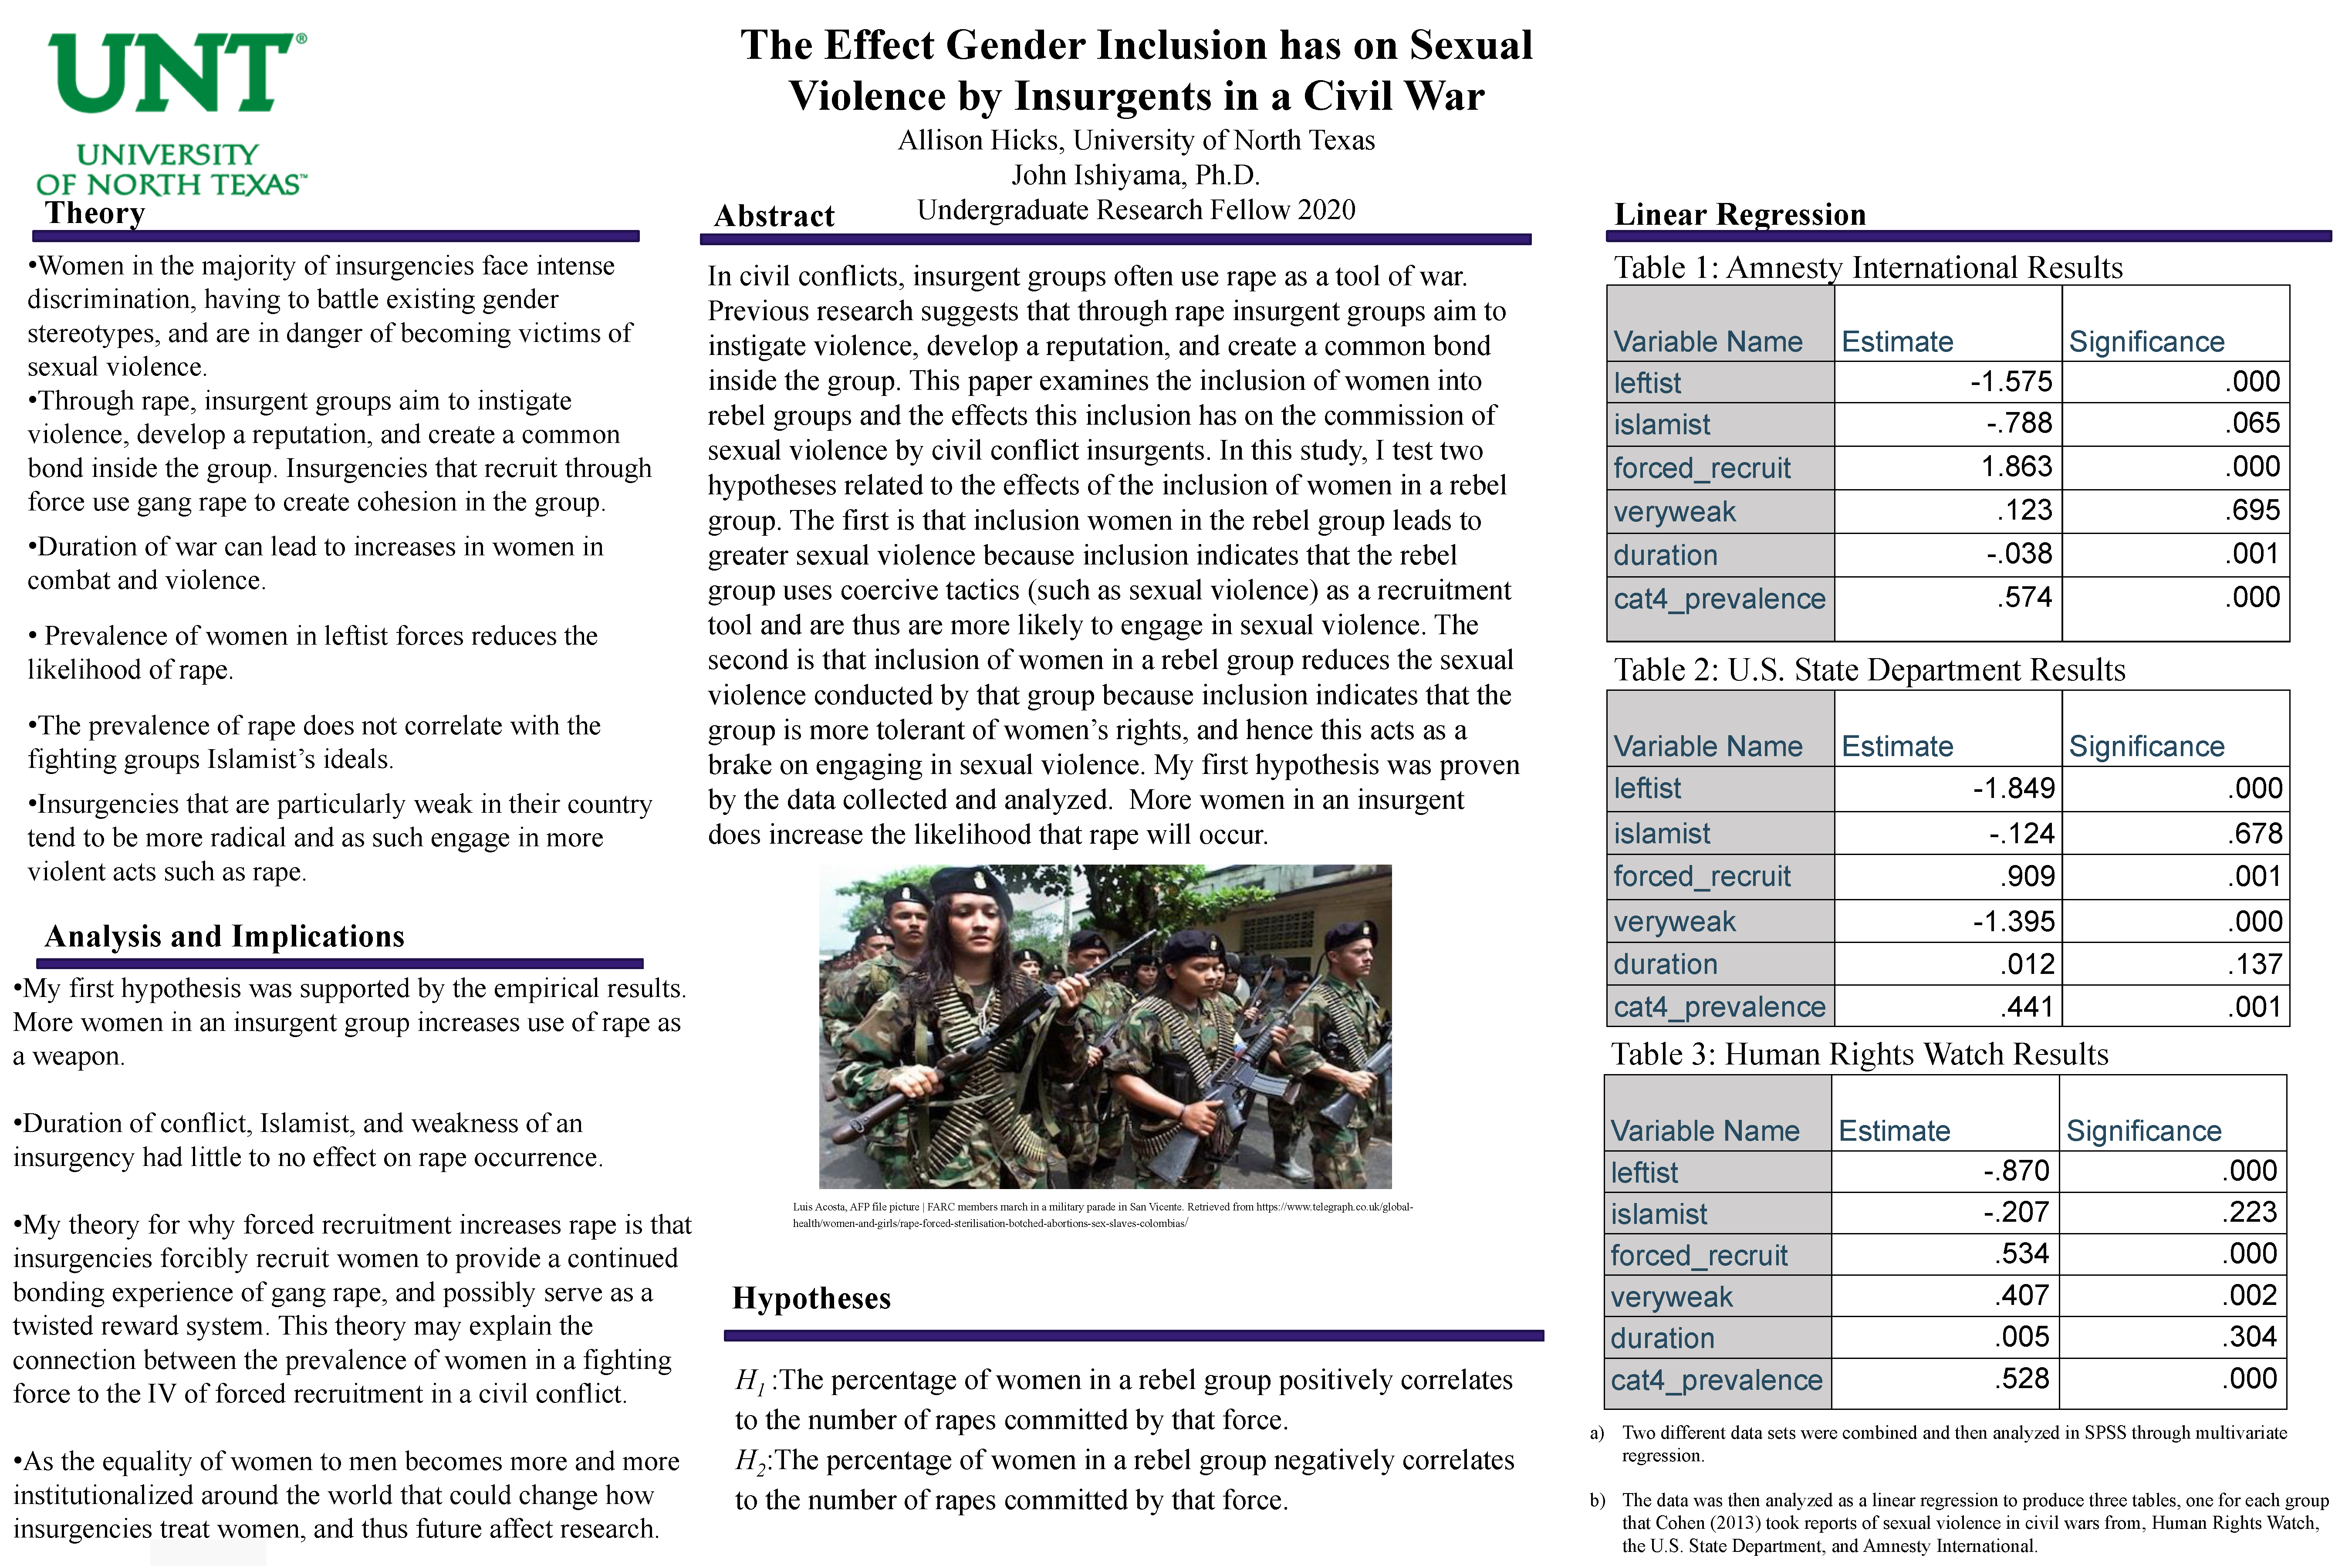 The Effect Gender Inclusion has on Sexual Violence by Insurgents in a Civil War